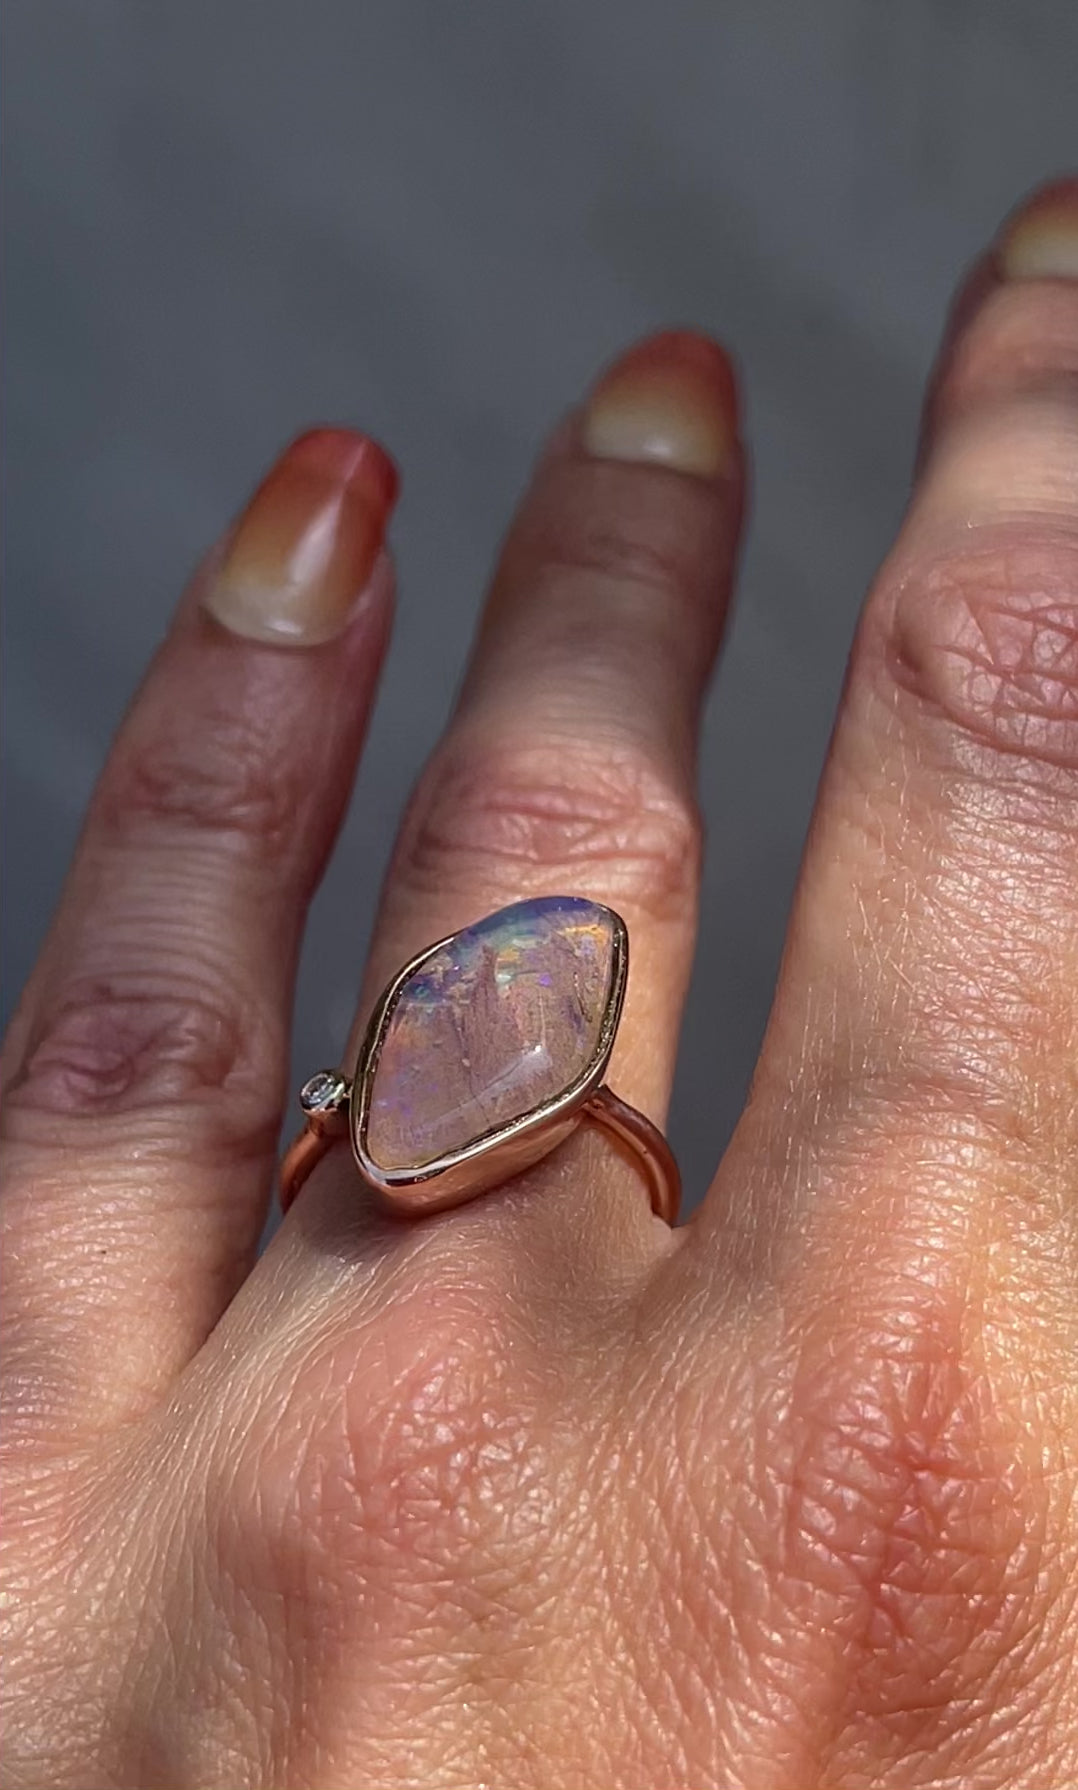 Video of Zion Dali Australian Opal Ring by NIXIN Jewelry modeled on hand. Rose gold opal ring.